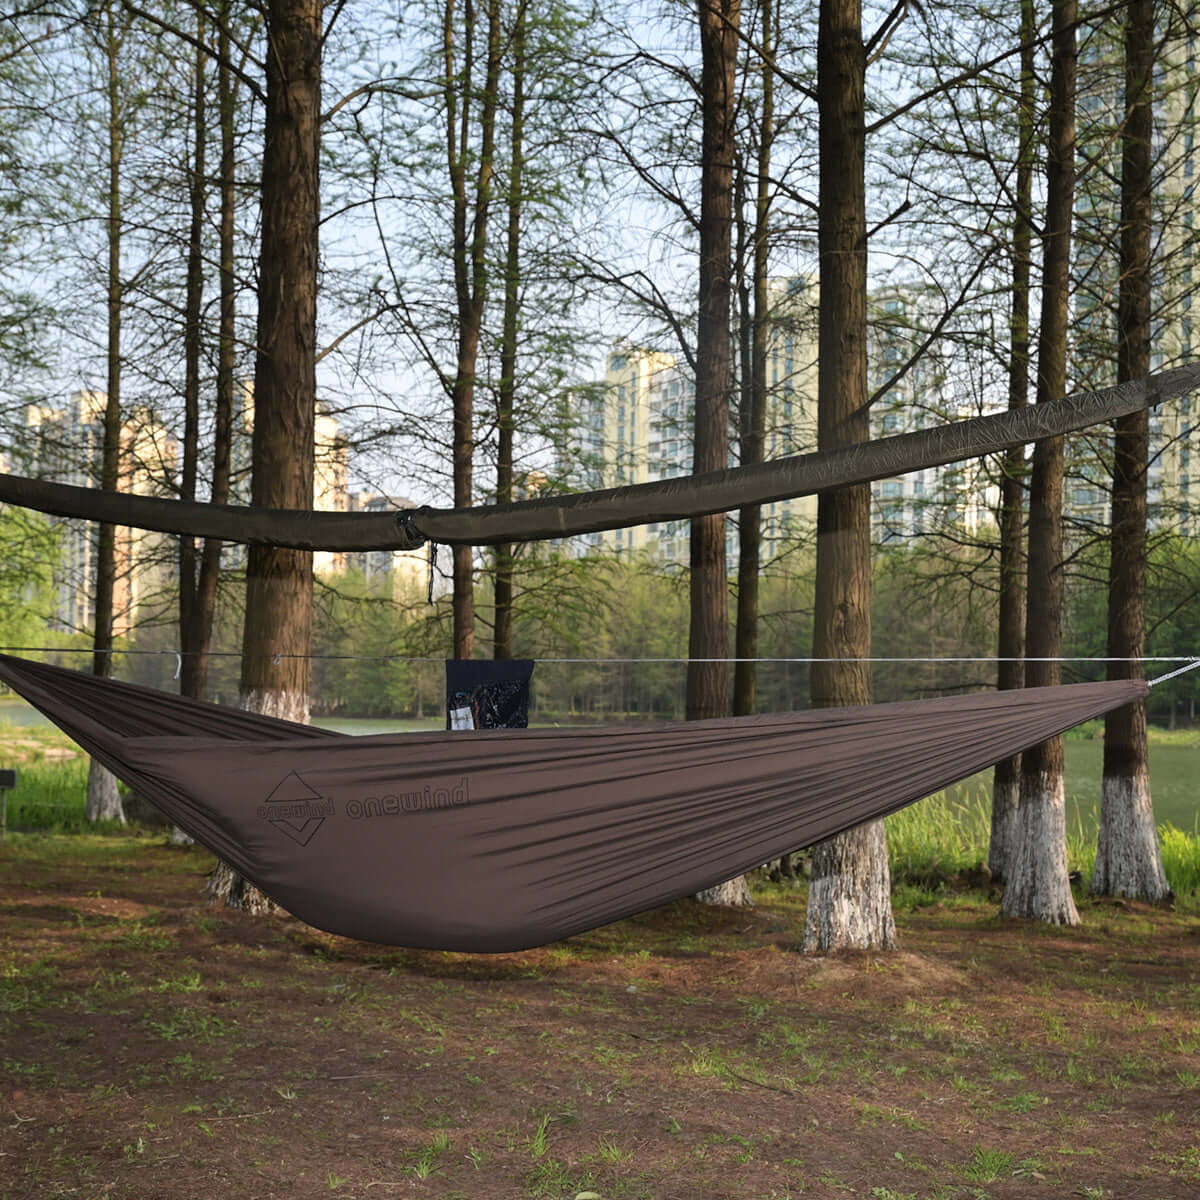 Hammock Camping | Onewind Outdoors